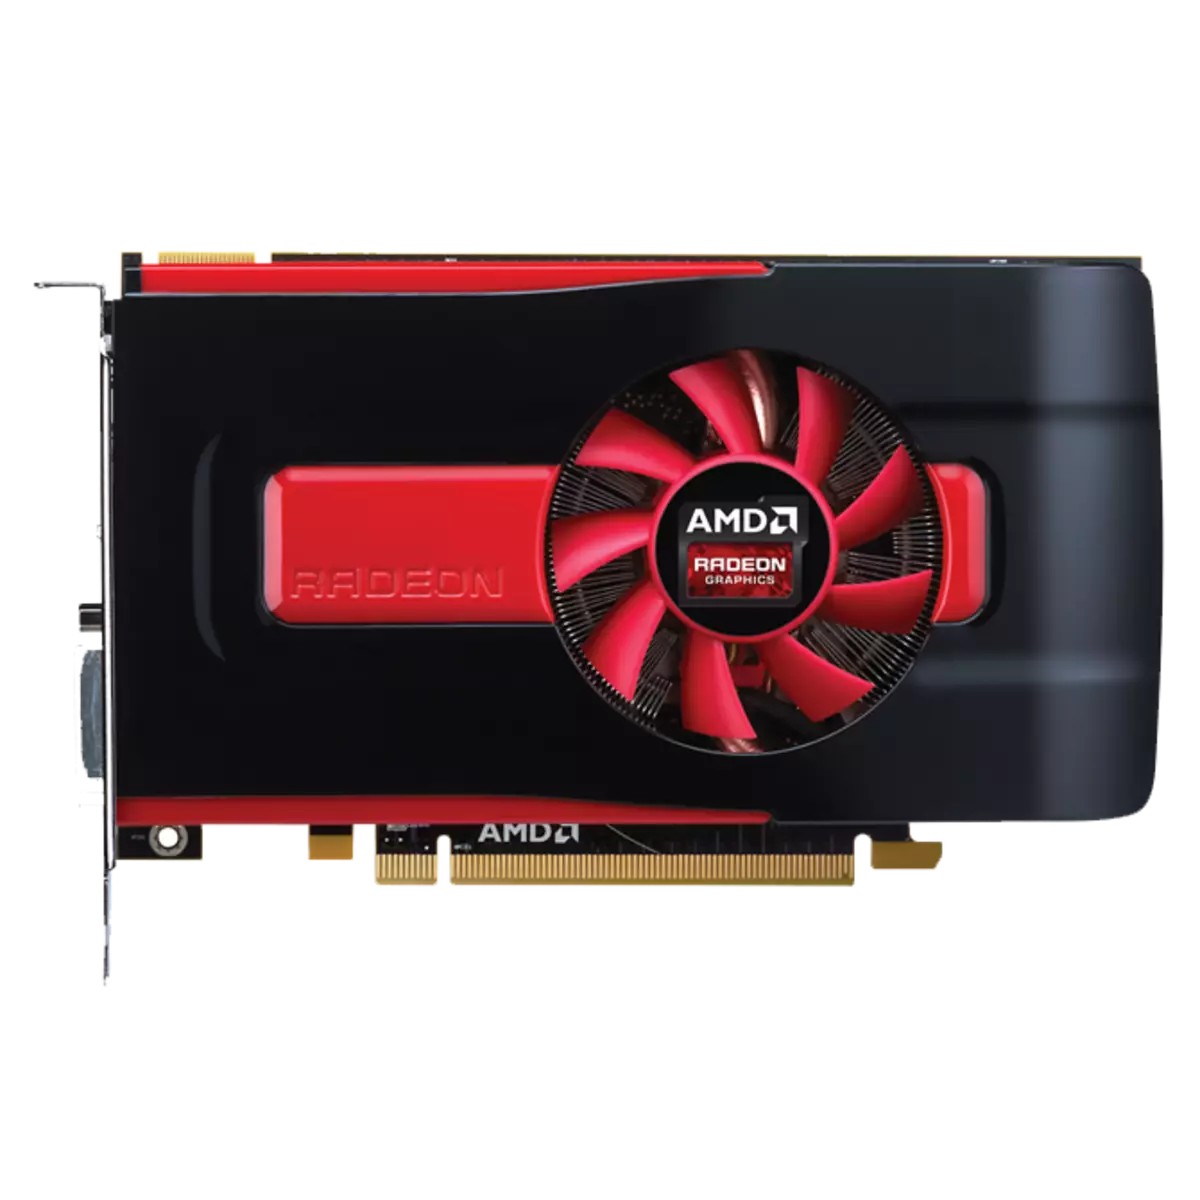 Download Drivers for AMD Radeon HD 7700 Series